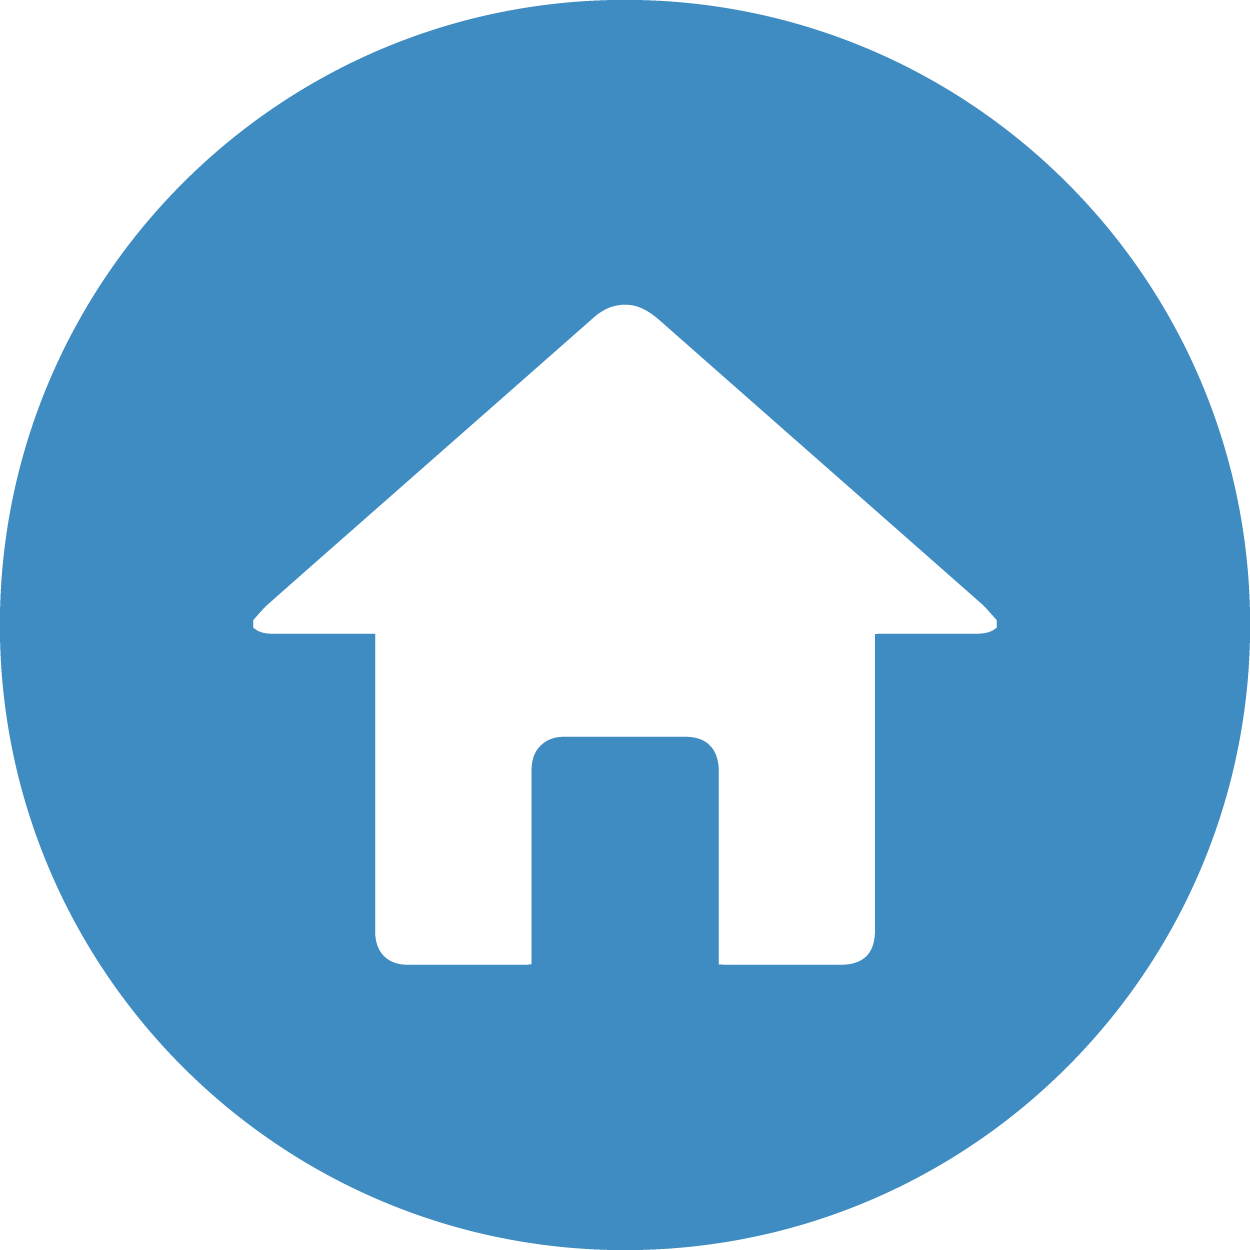 217 2174484 blue home button png www pixshark com images galleries linked in logo